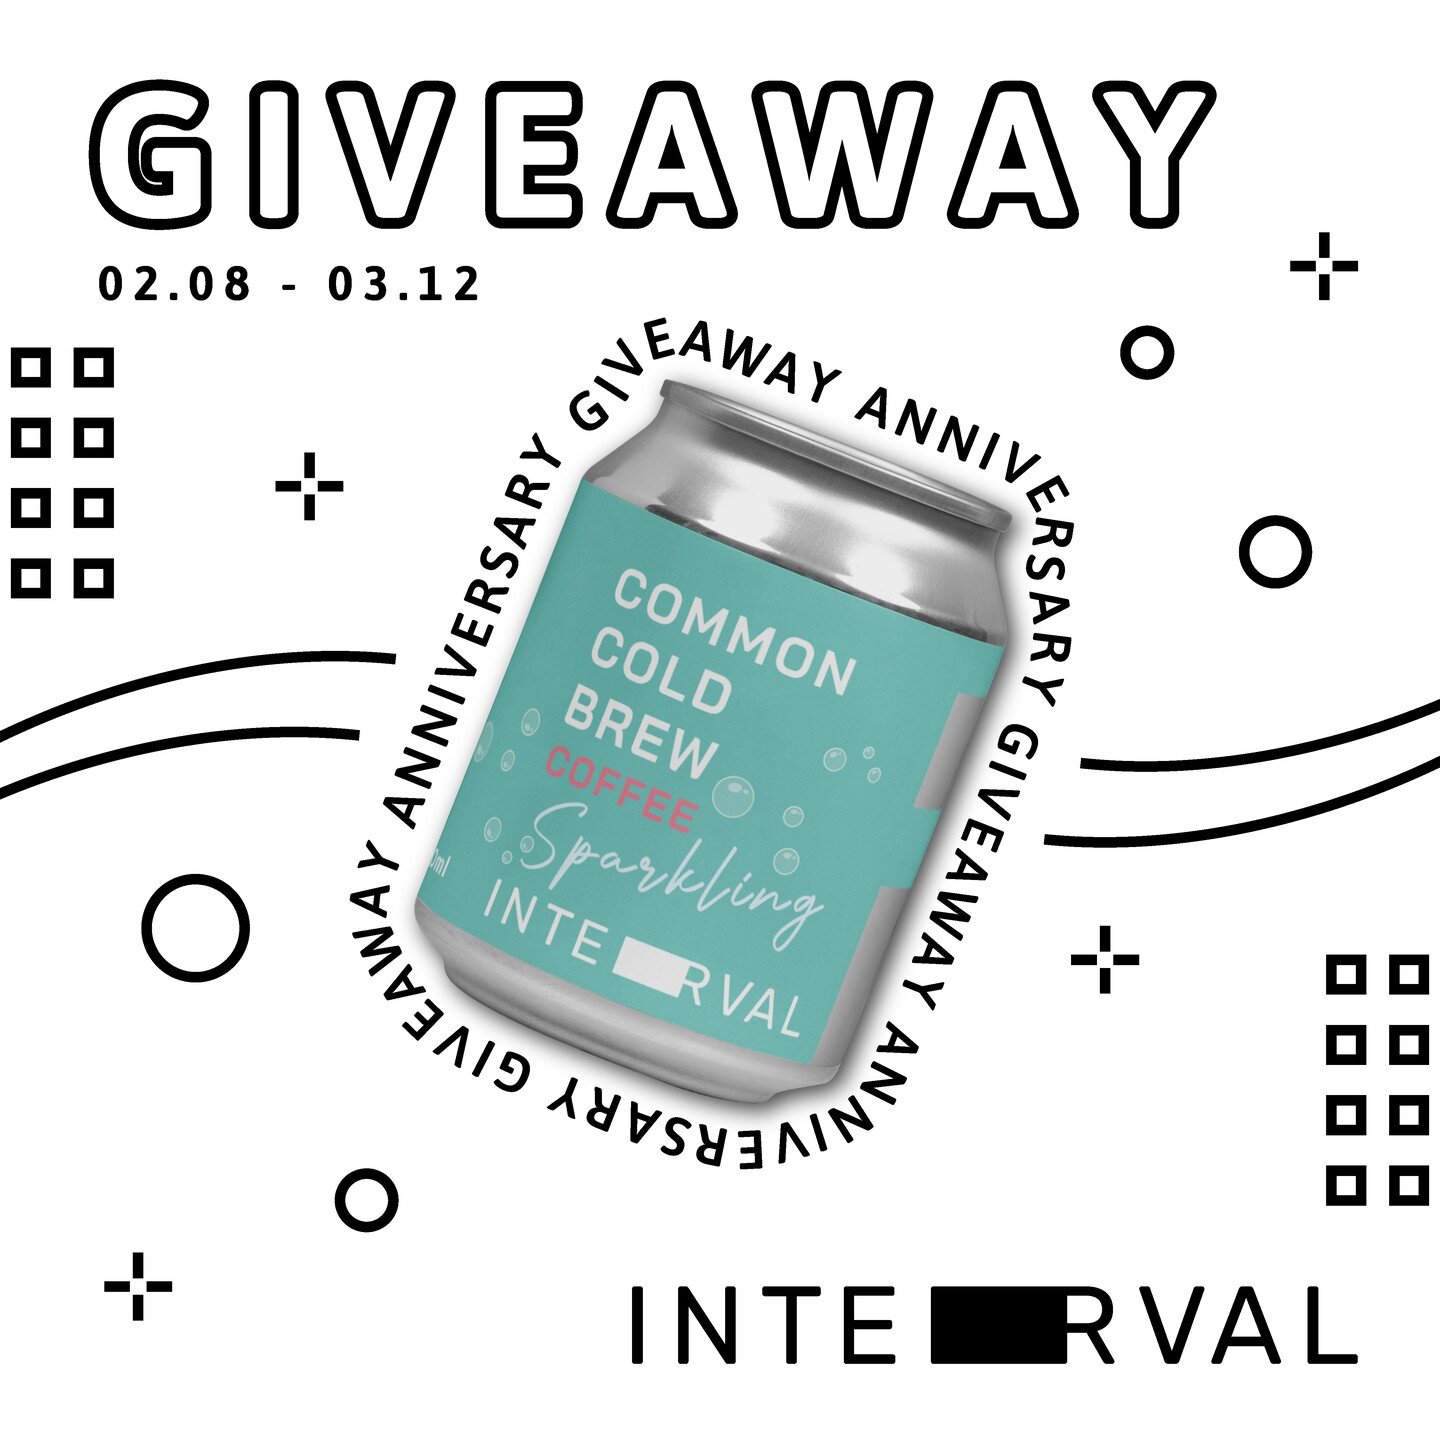 Interval Anniversary Giveaway 
Interval 週年大贈送

To celebrate Interval Cyberport and Lohas Park's 2nd anniversary, we are doing a giveaway from February 8 to March 12 to all dine-in guests. Simply 1) follow our Instagram and 2) post a story to receive 